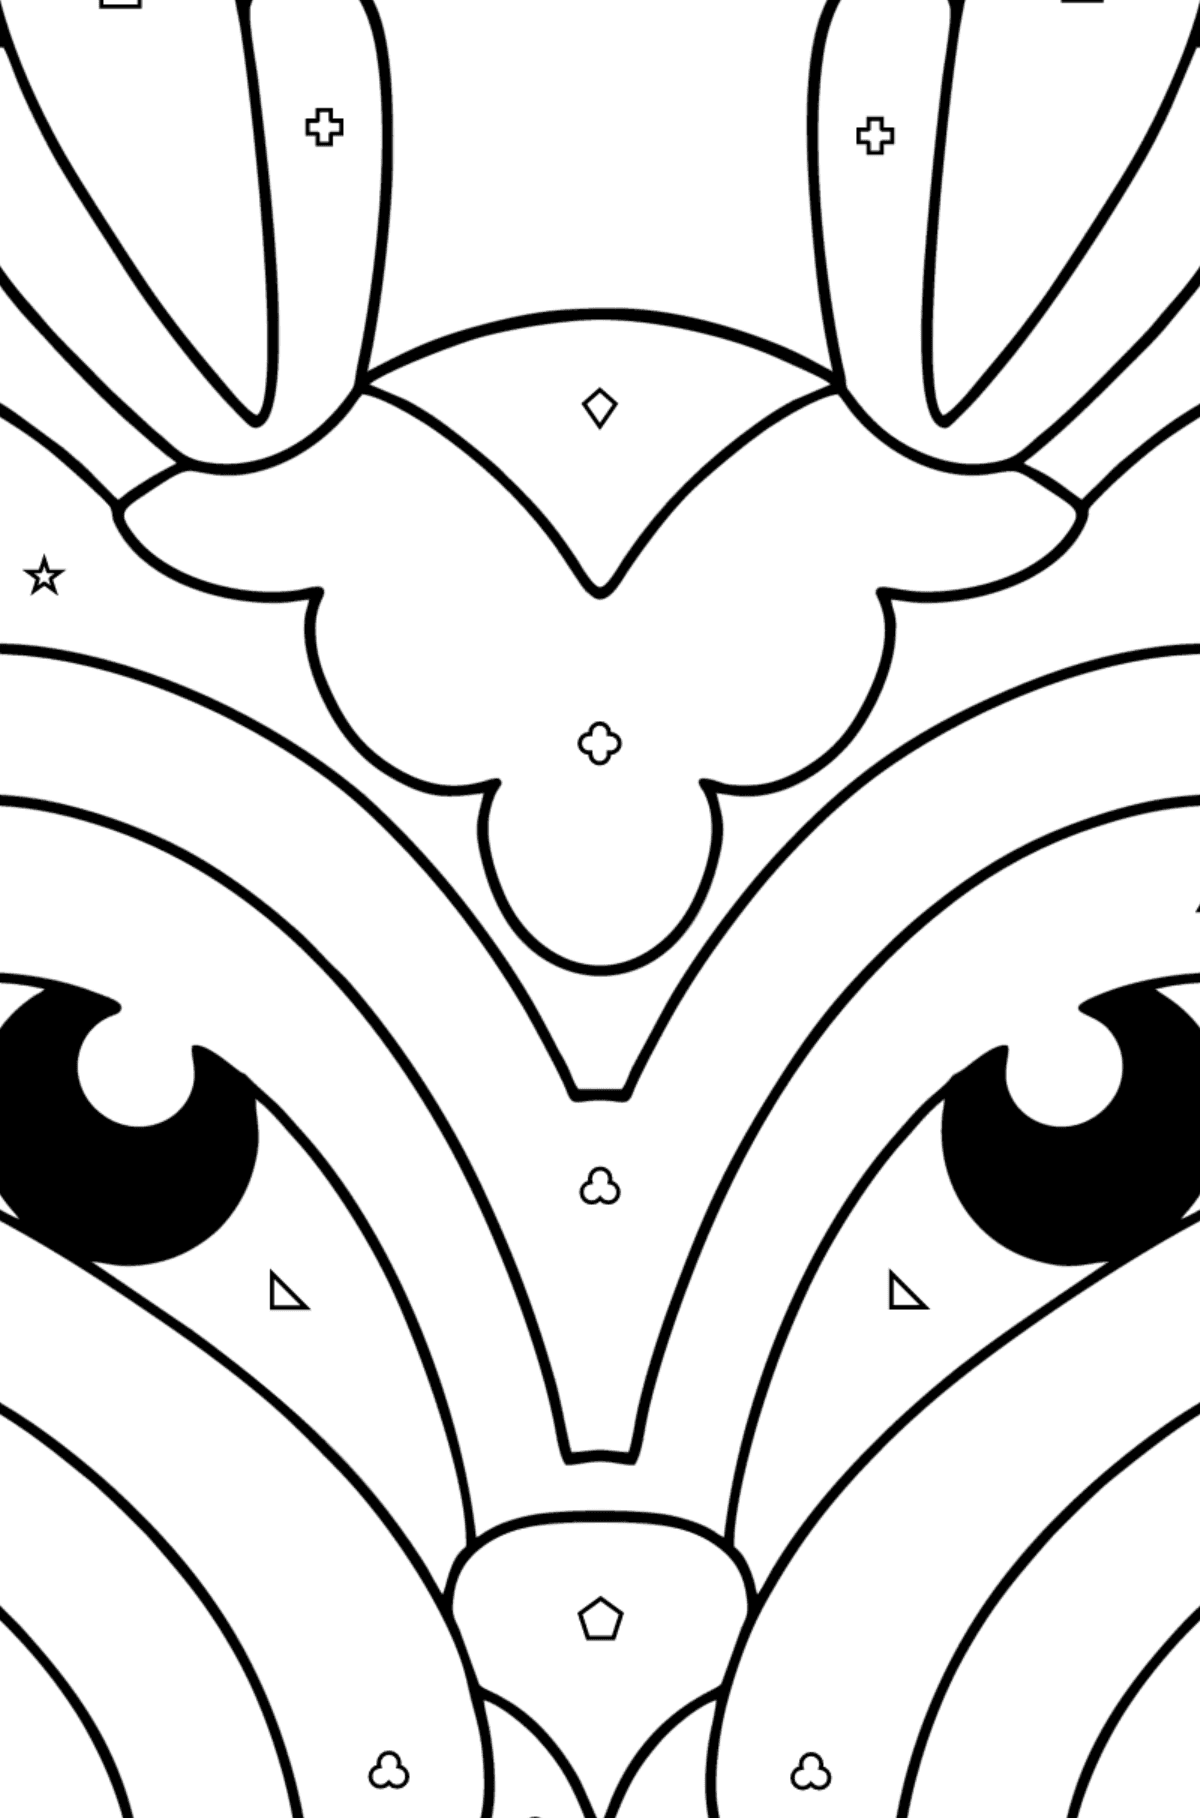 Deer Anti stress coloring page - Coloring by Geometric Shapes for Kids